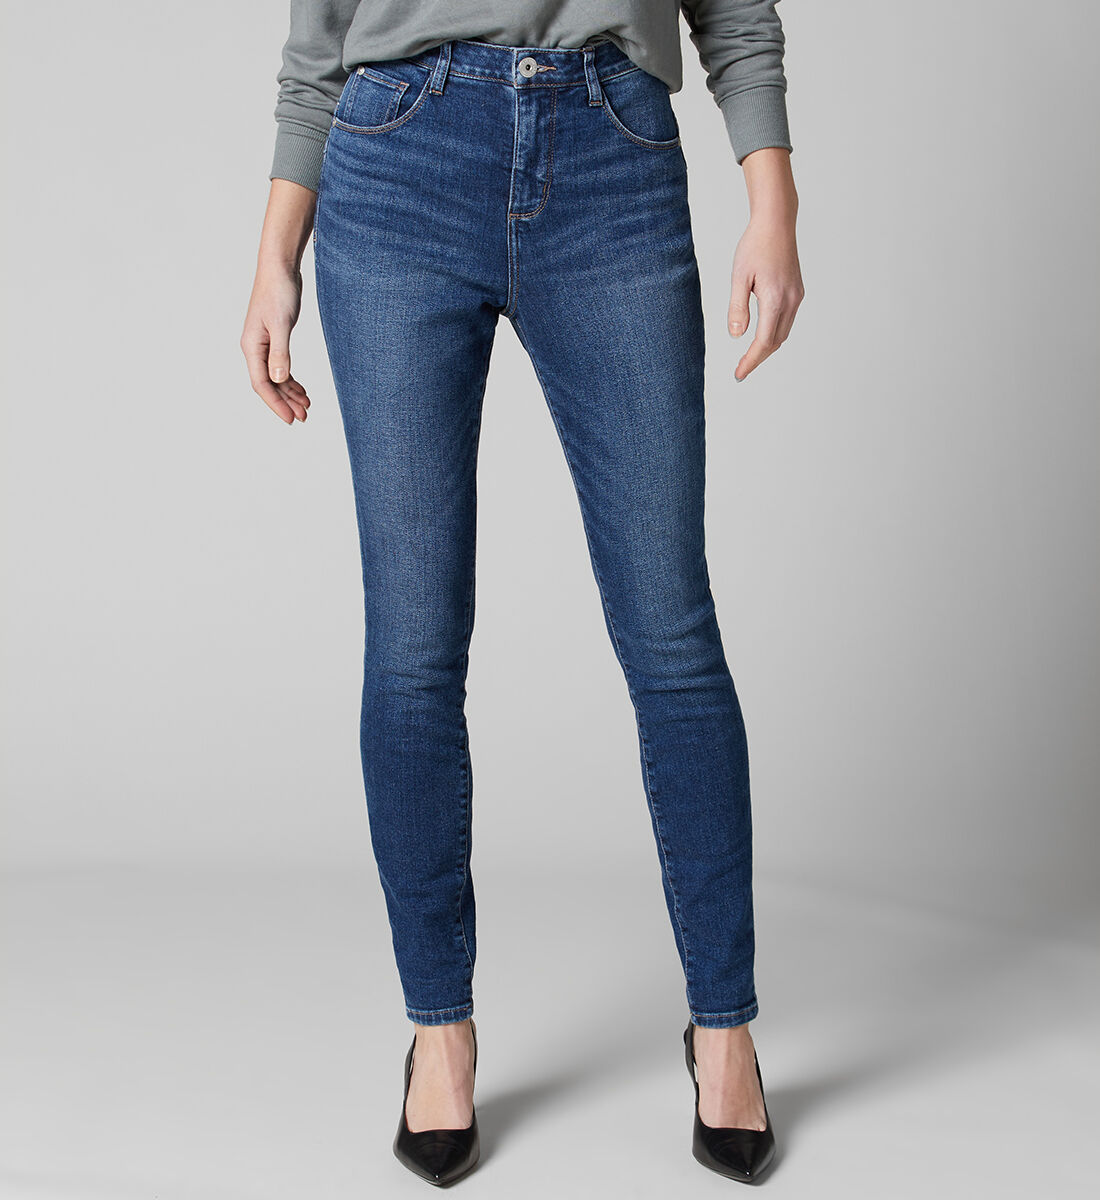 Cecilia High Rise Skinny Jeans Side